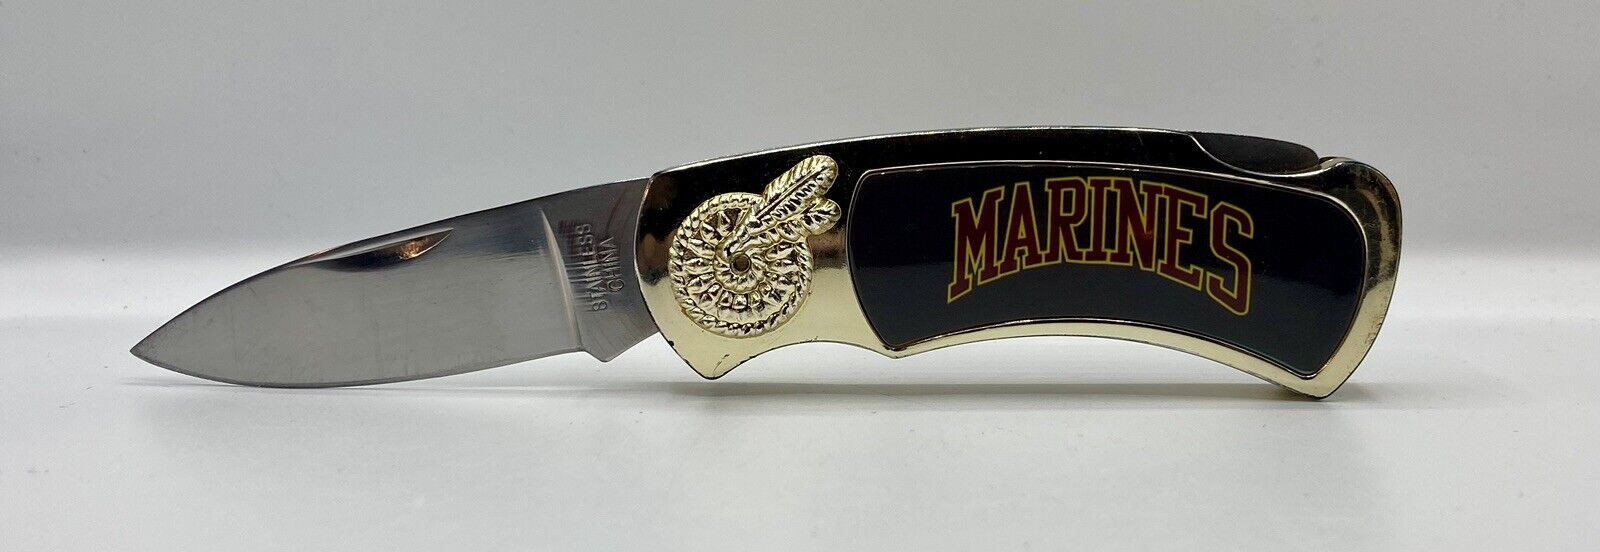 Marines Folding Lock Knife With Tin Case. Review Pics Before Purchase. 7”X2”